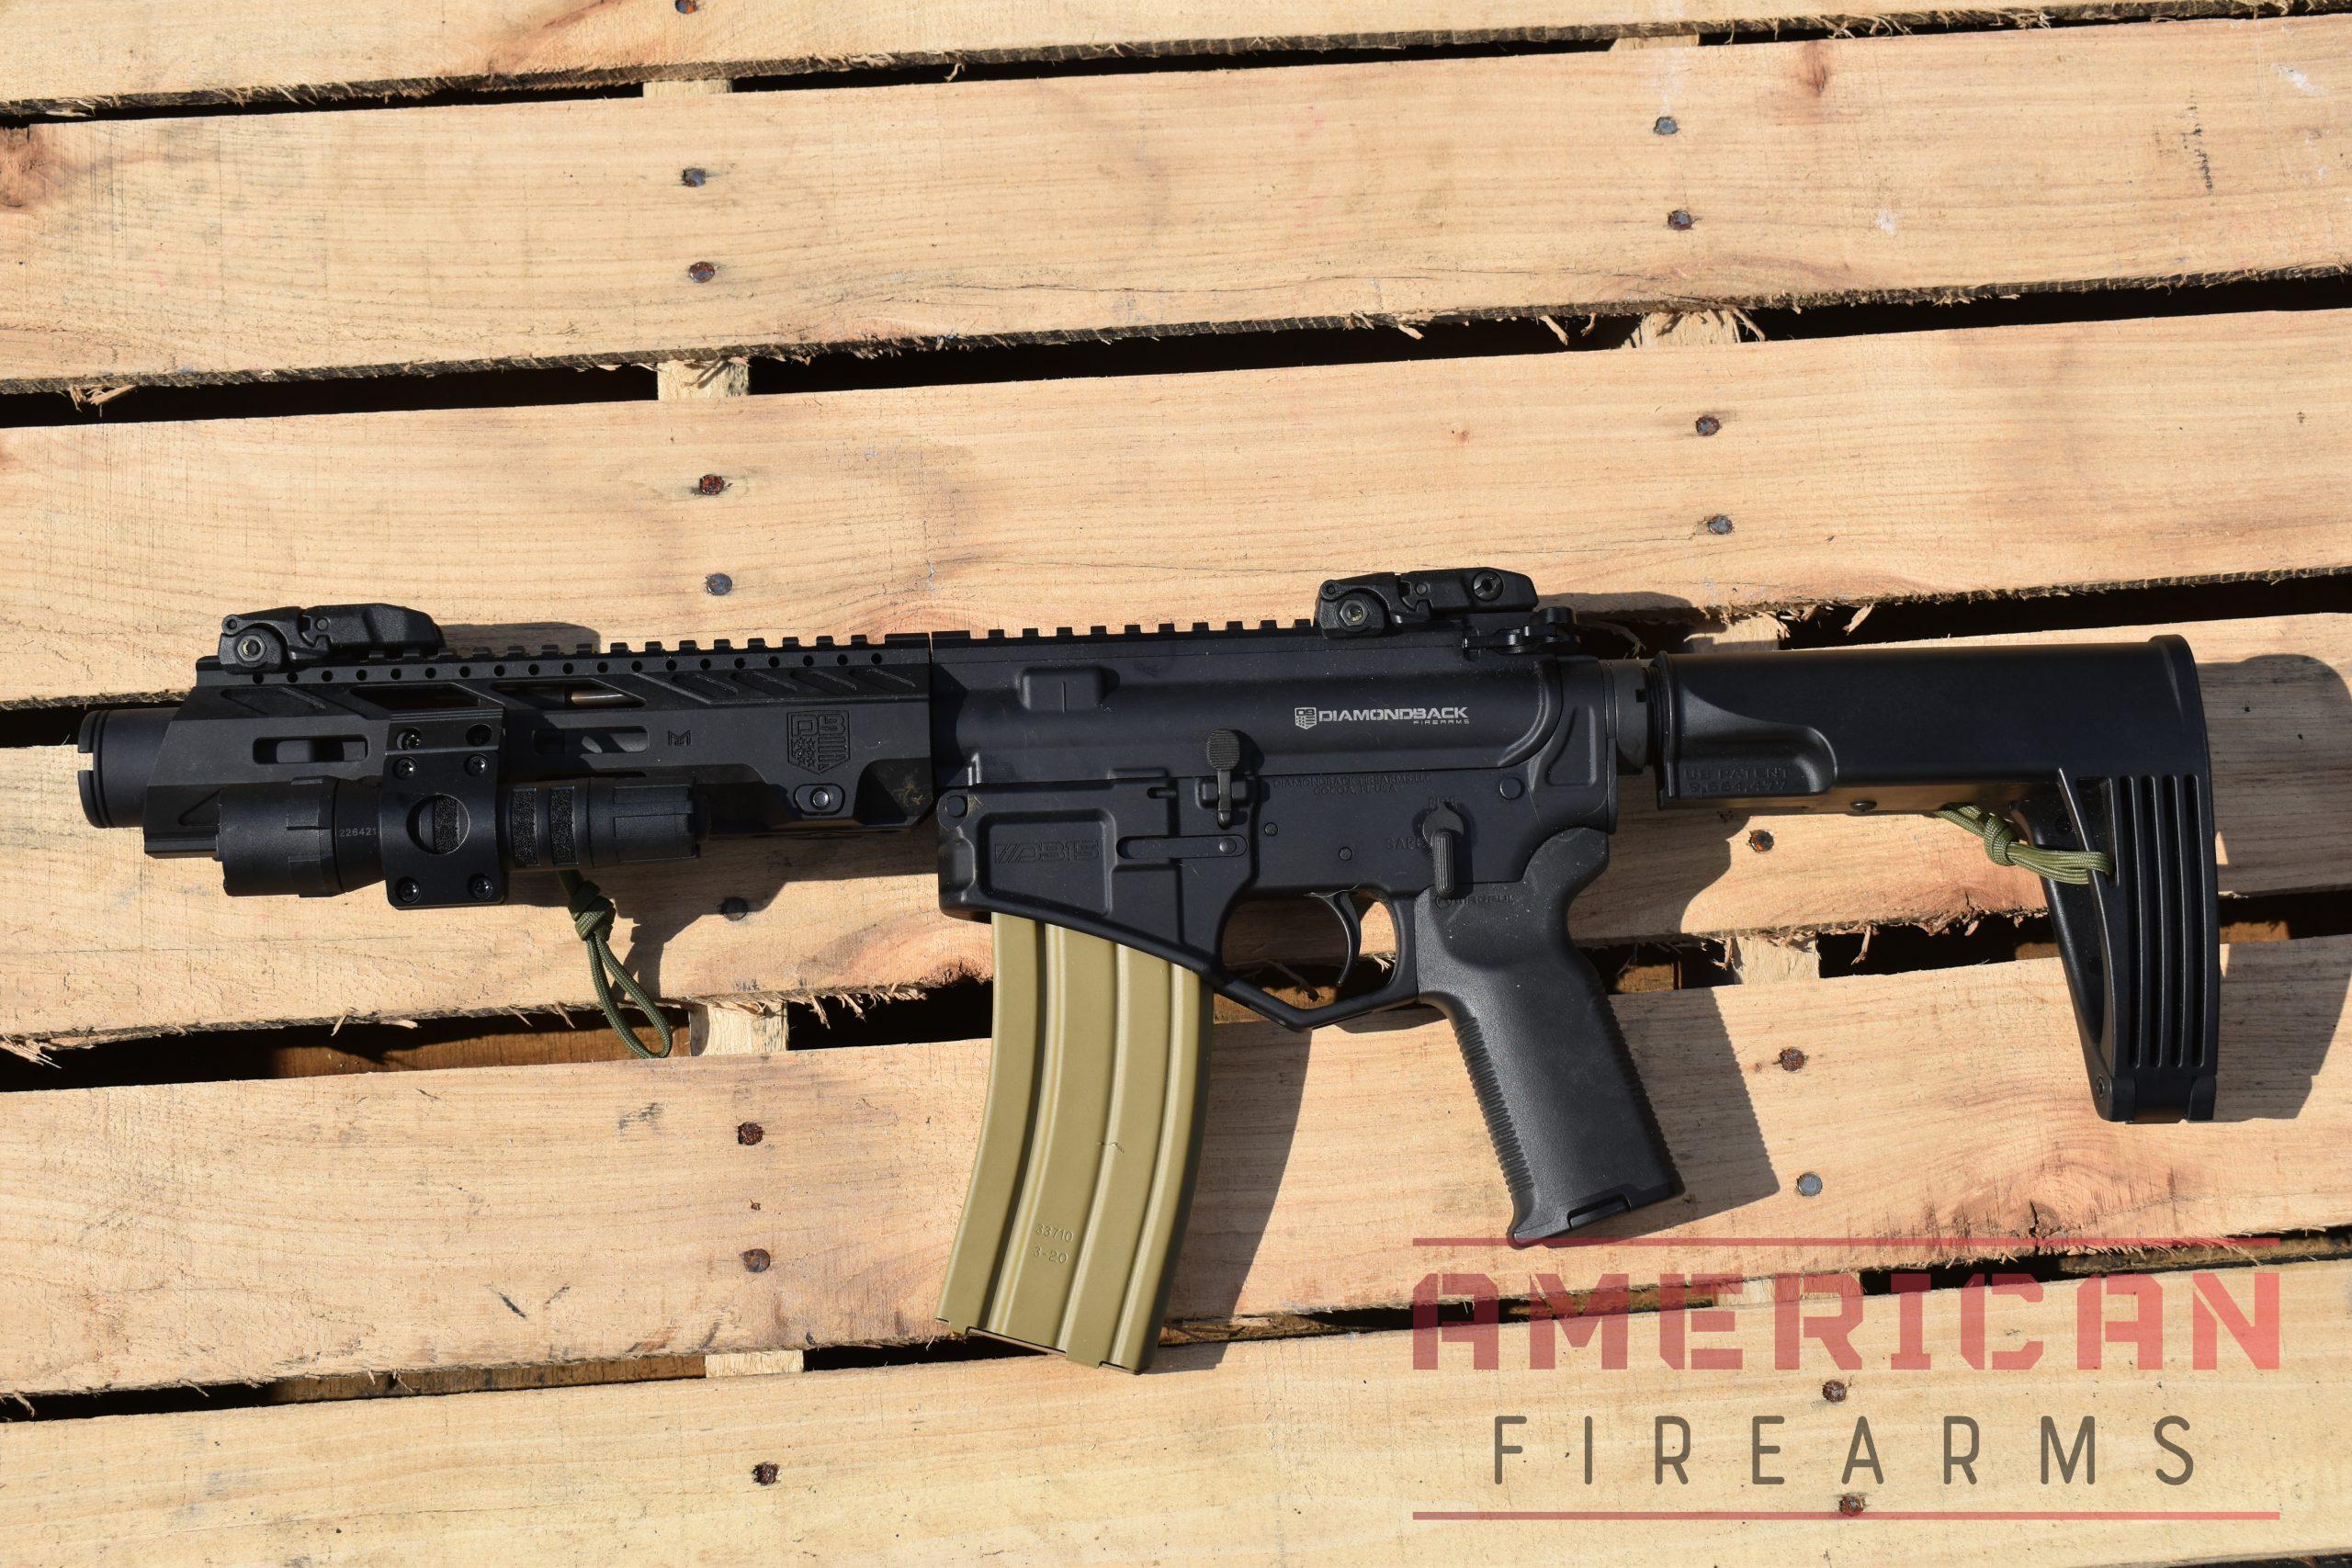 Diamondback DB15 pistol gives you a lot of the benefits of the .300 BLK in a small package.